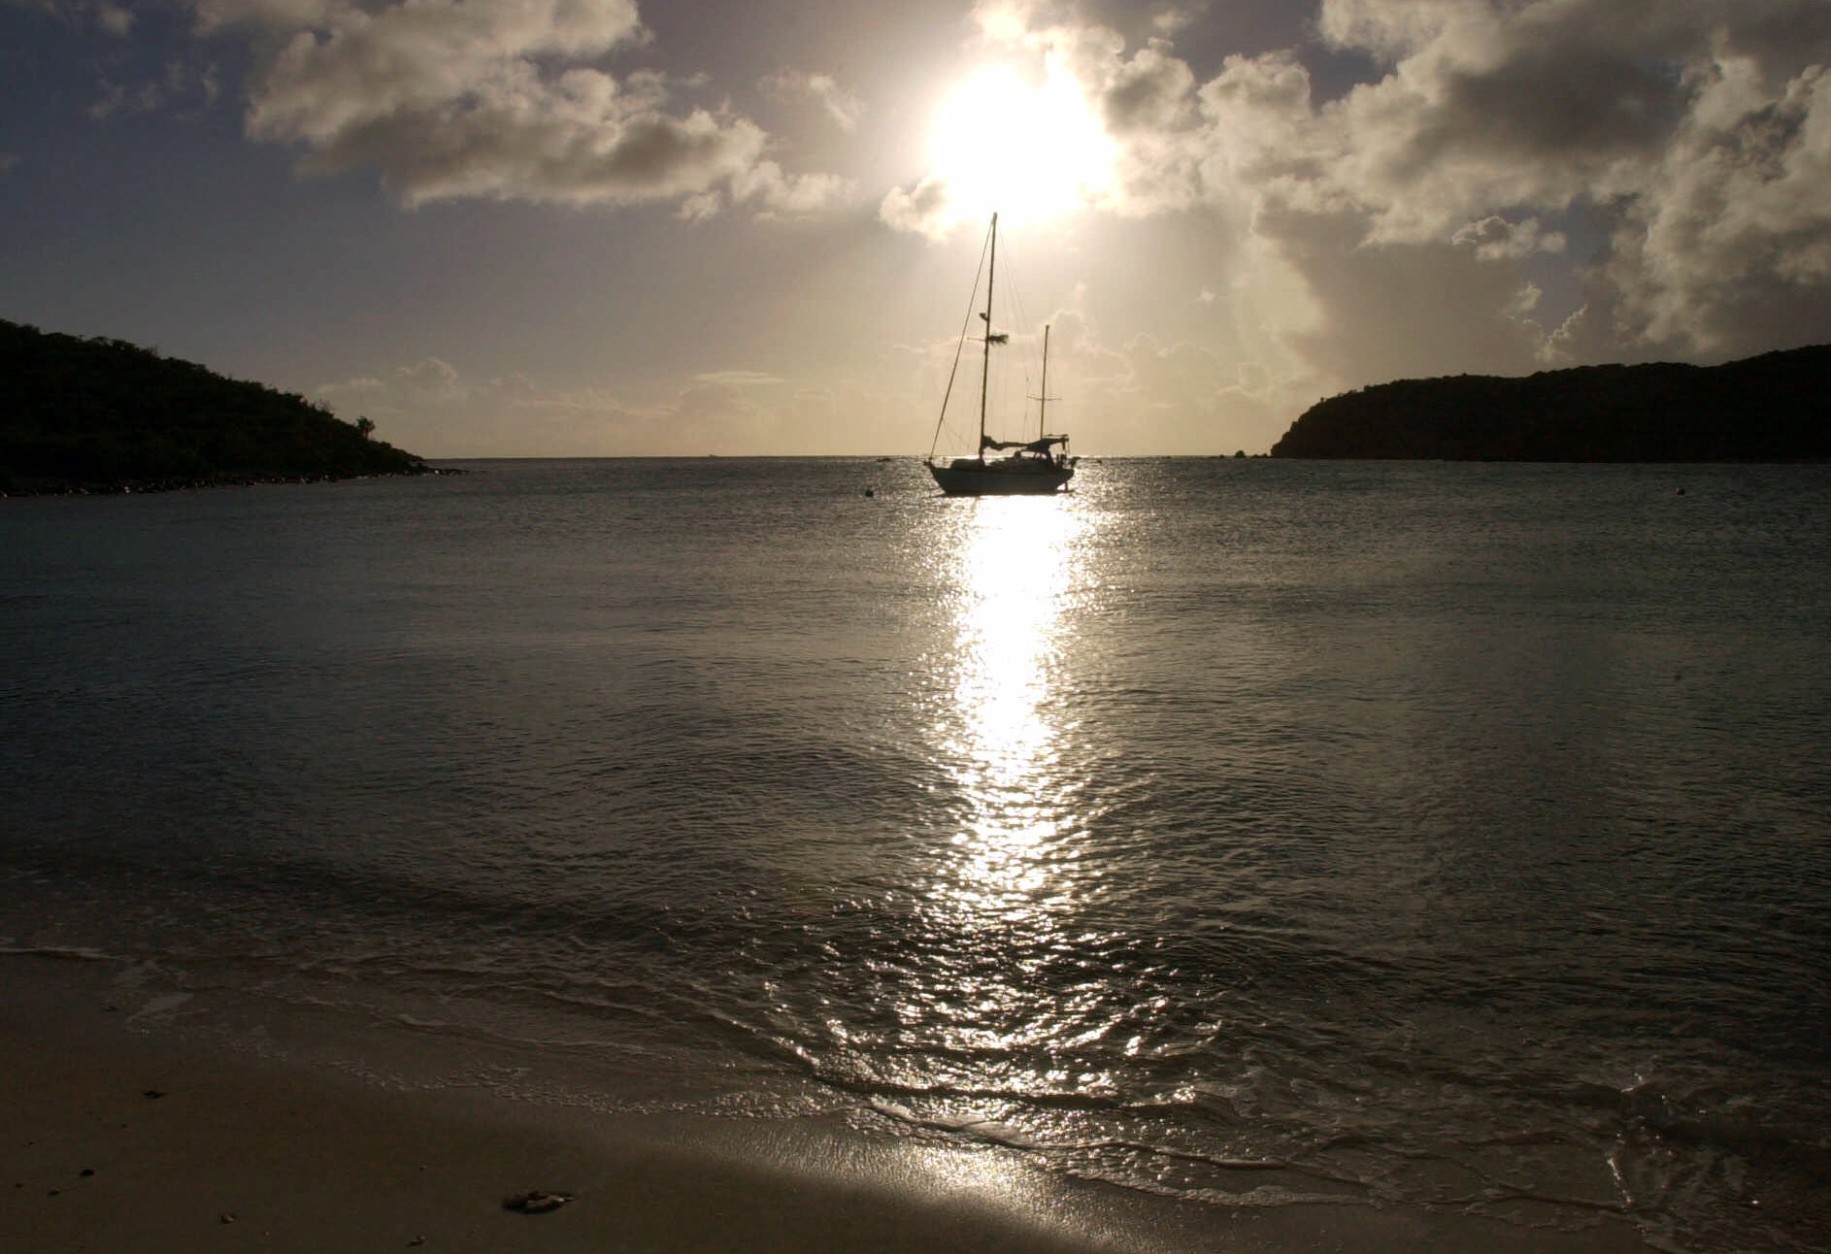 A lone sailboat rests in the waters of Saltpond Bay at St. John, U.S. Virgin Islands, Dec. 17, 2000. With a large portion of land and water protected within the boundaries of a national park, St. John remains perhaps the most pristine of the Virgin Islands. (AP Photo/ Tomas van Houtryve)